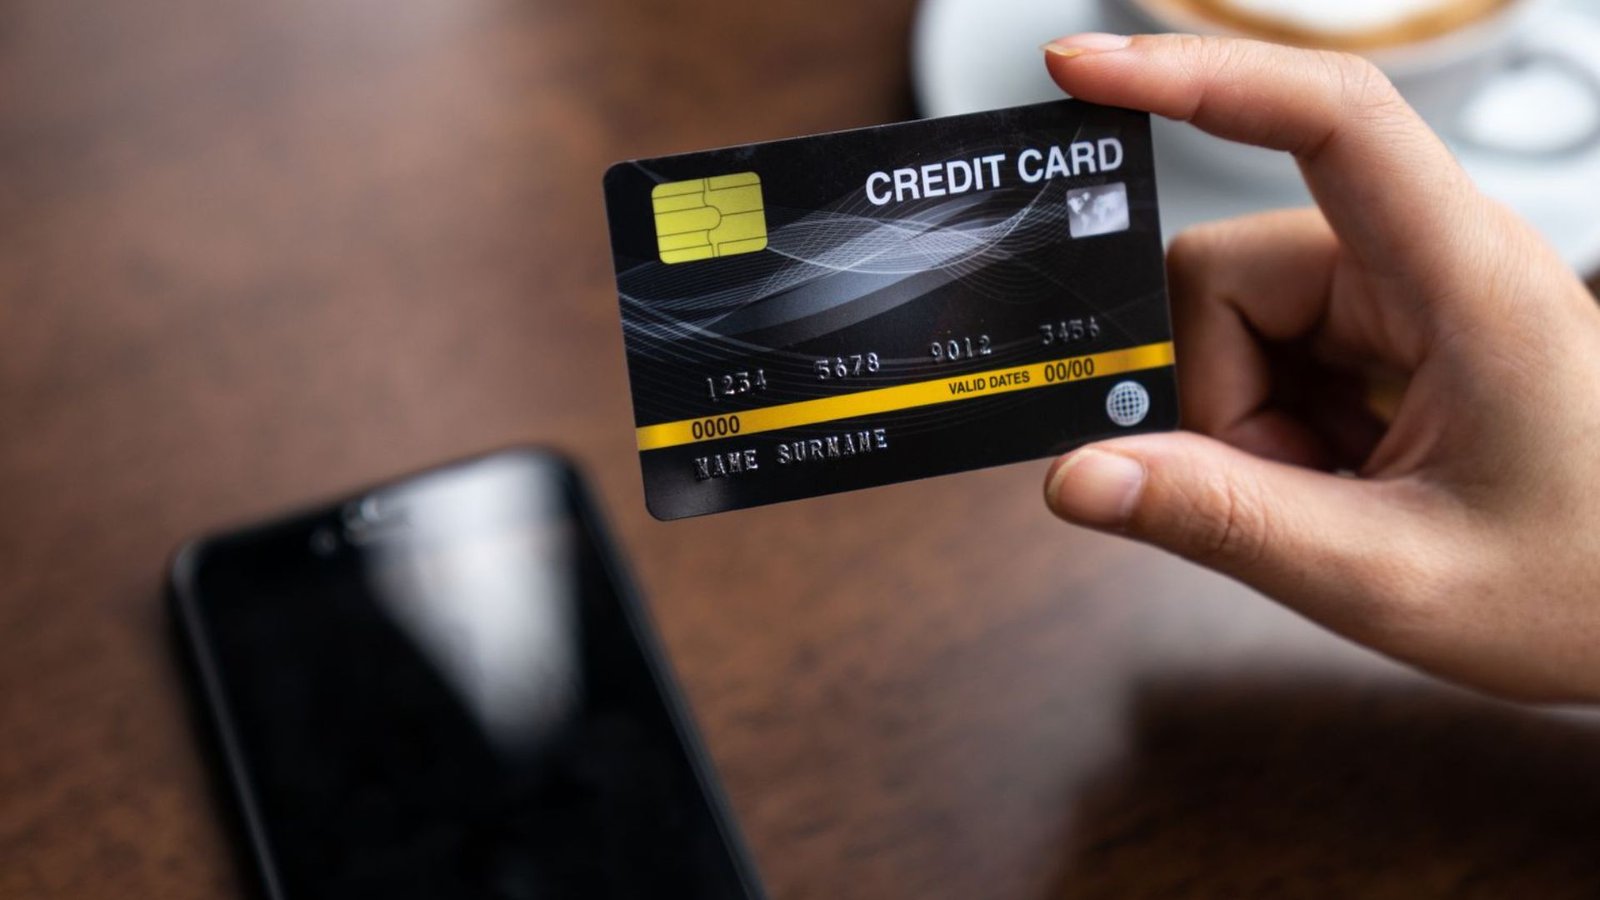 A Person holding a Black Credit Card